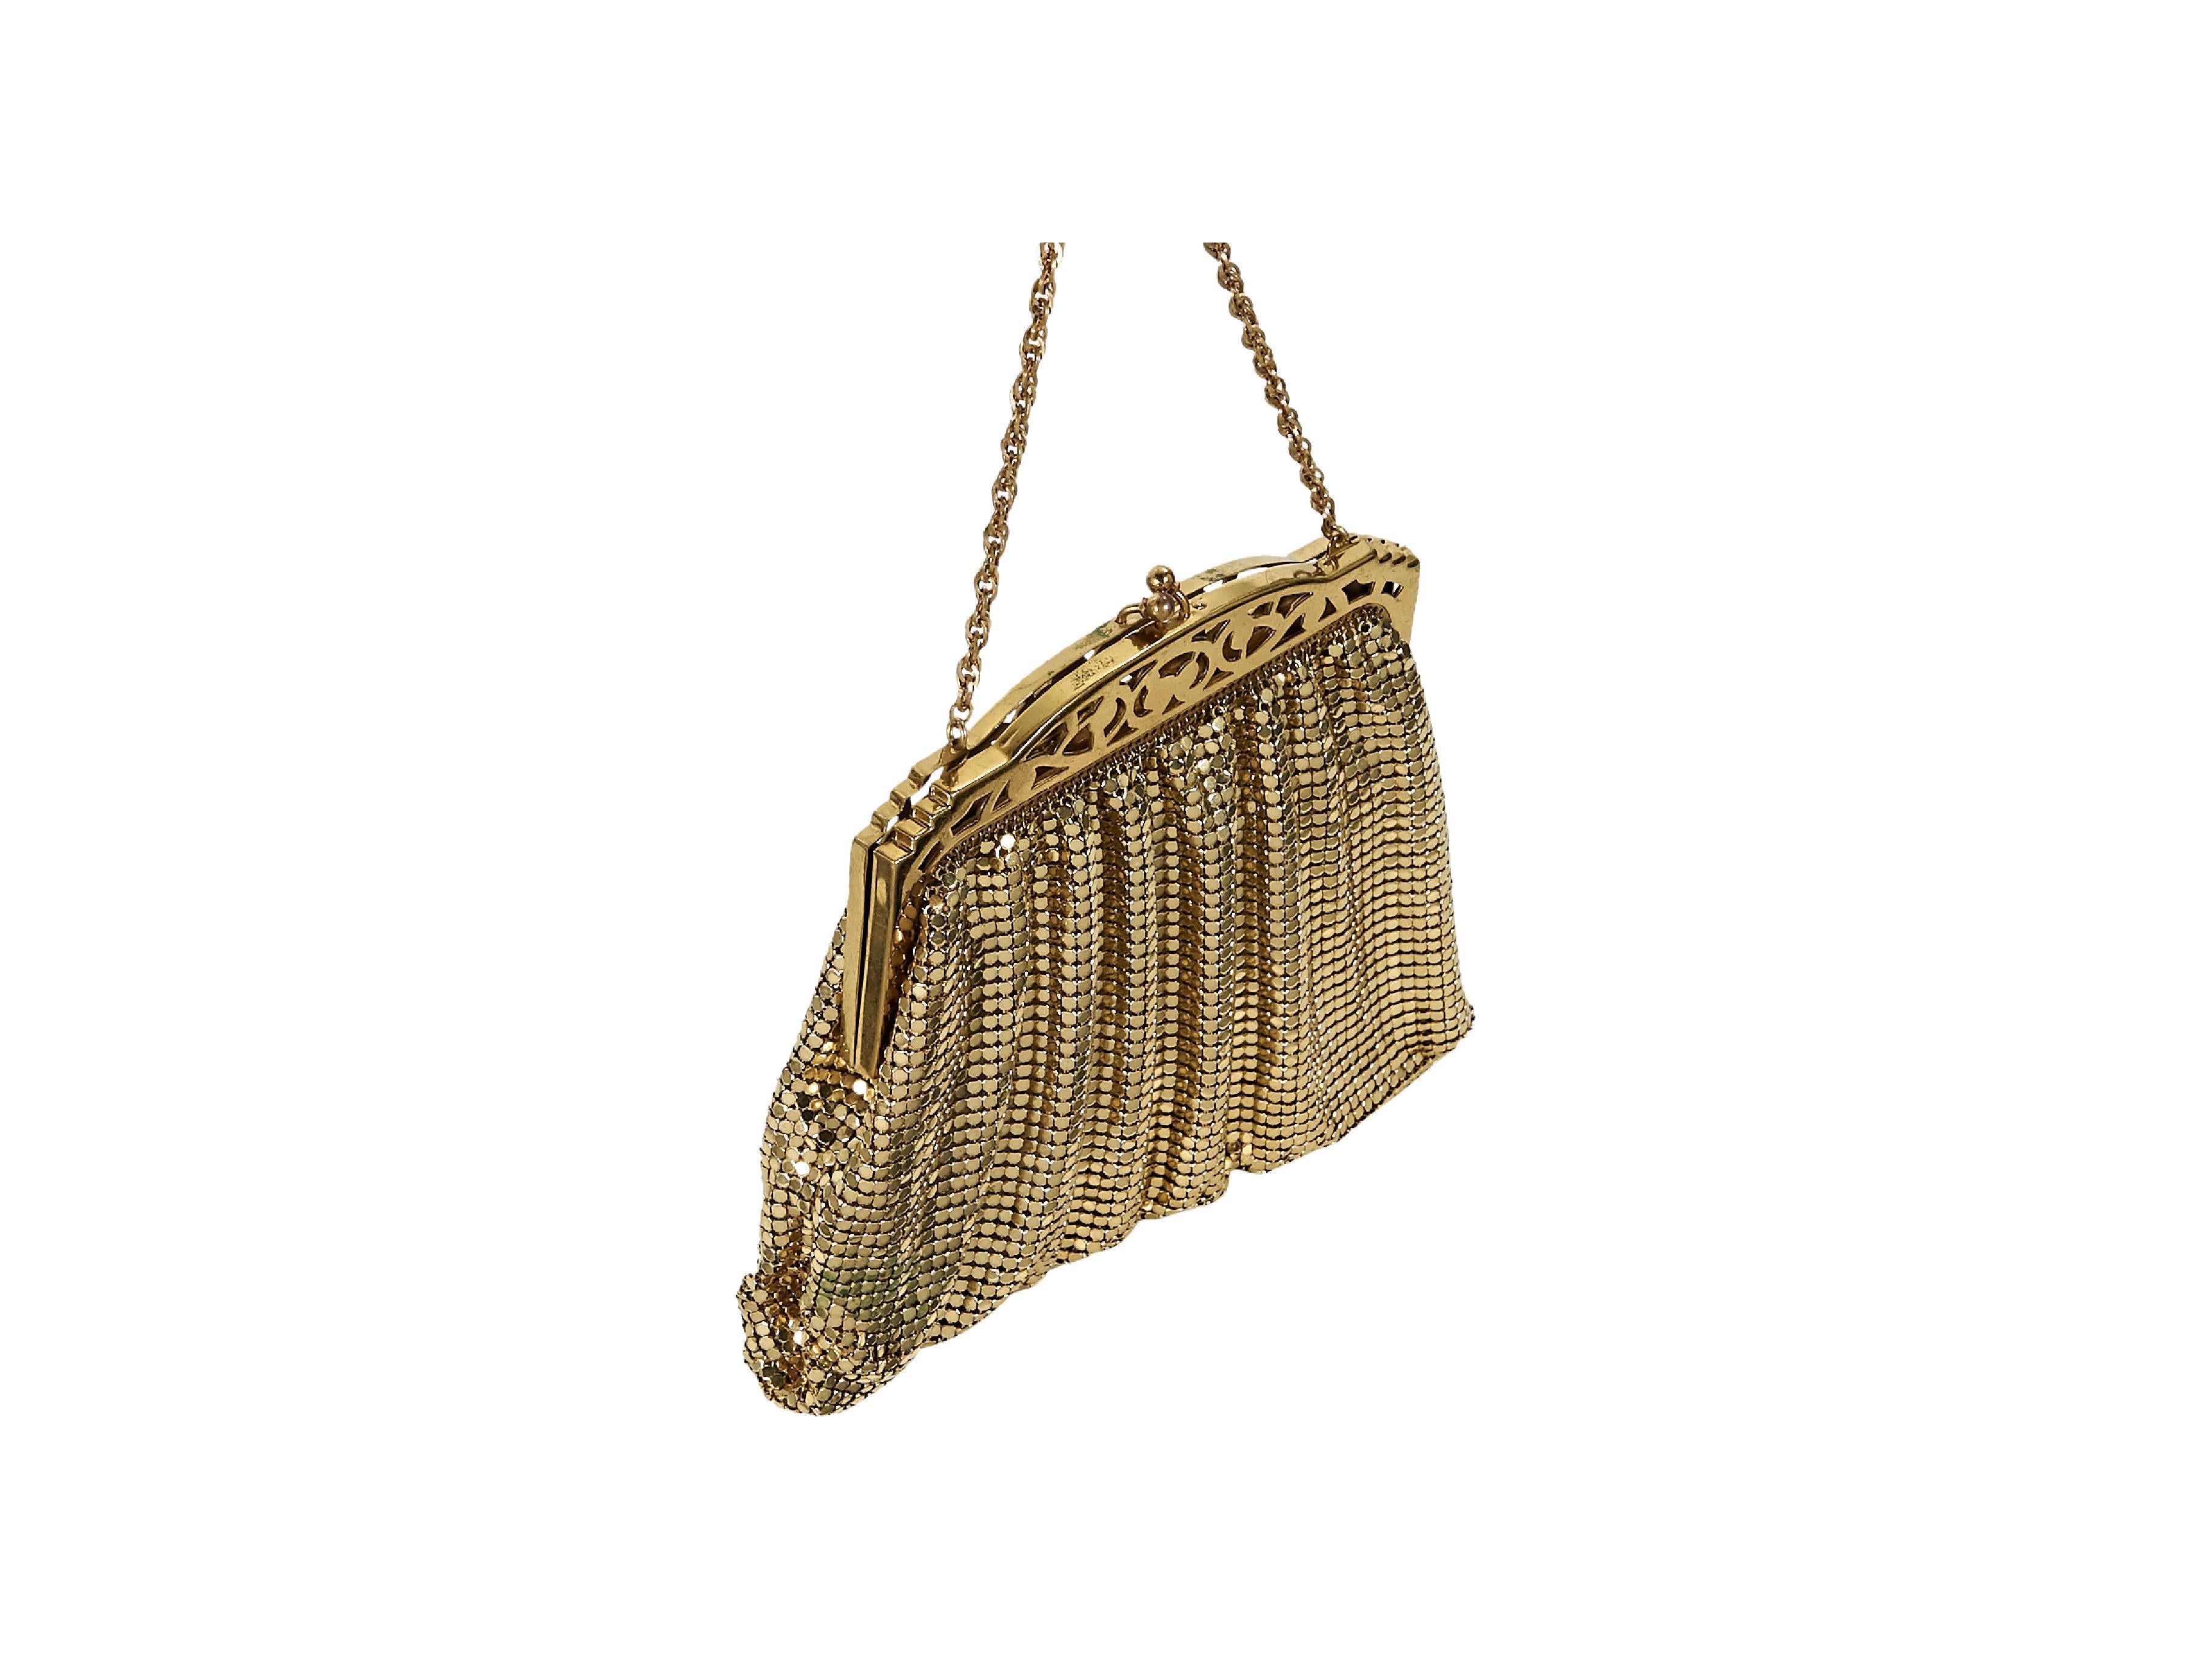 Product details:  Vintage goldtone mesh evening bag by Whiting & Davis.  Tuck-away chain shoulder strap.  Top kiss-lock closure.  Lined interior with inner slide pocket.  6